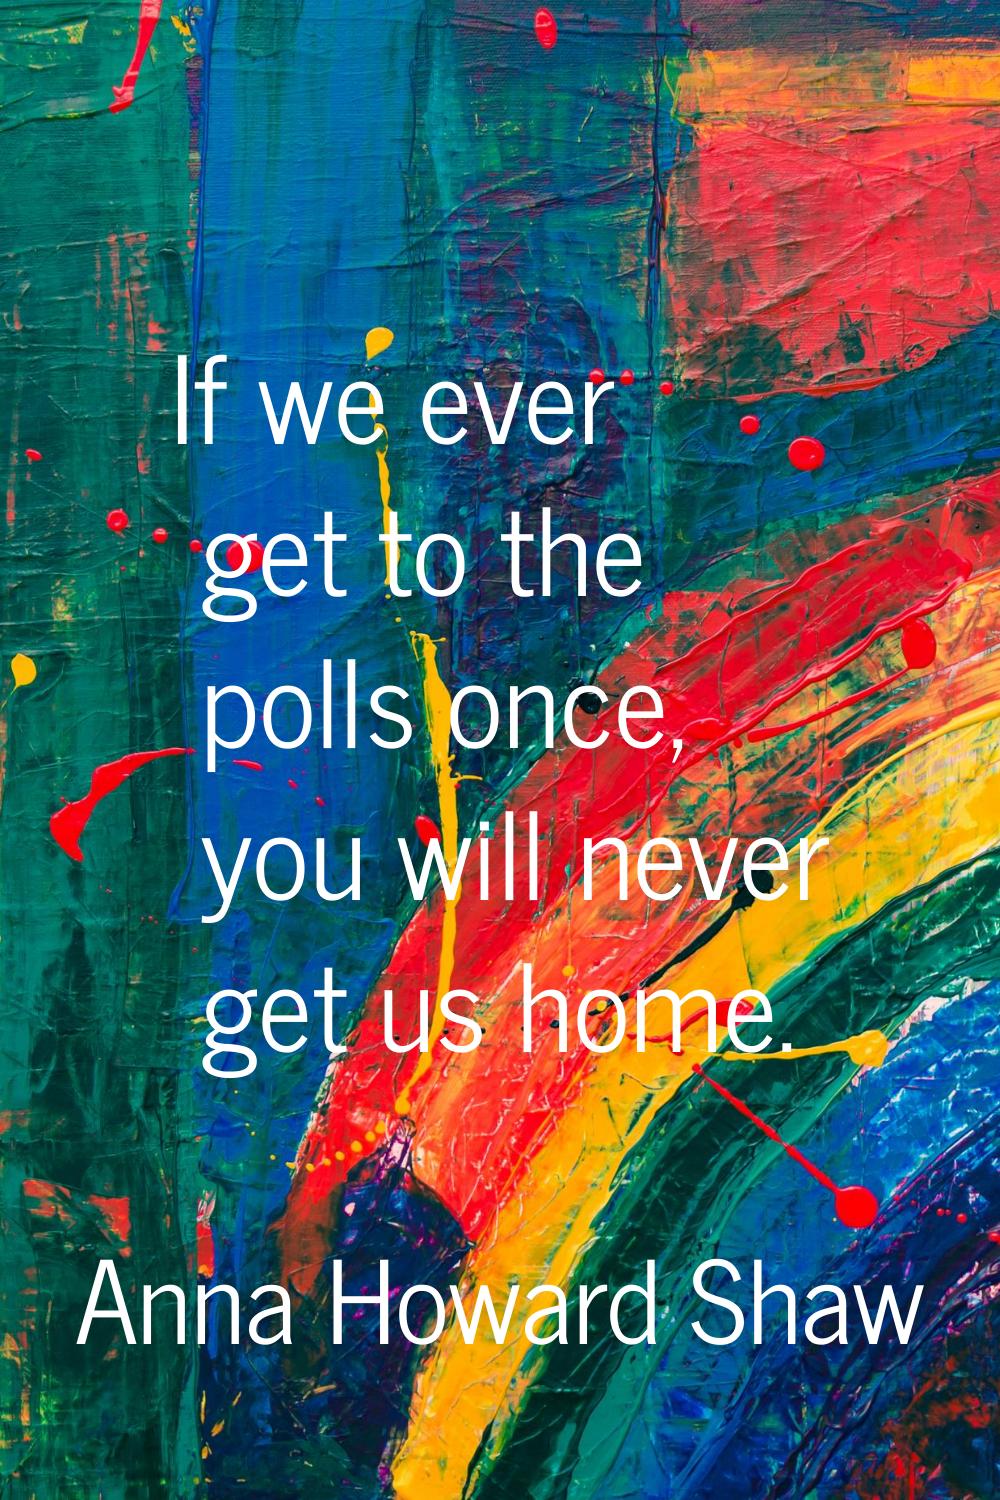 If we ever get to the polls once, you will never get us home.